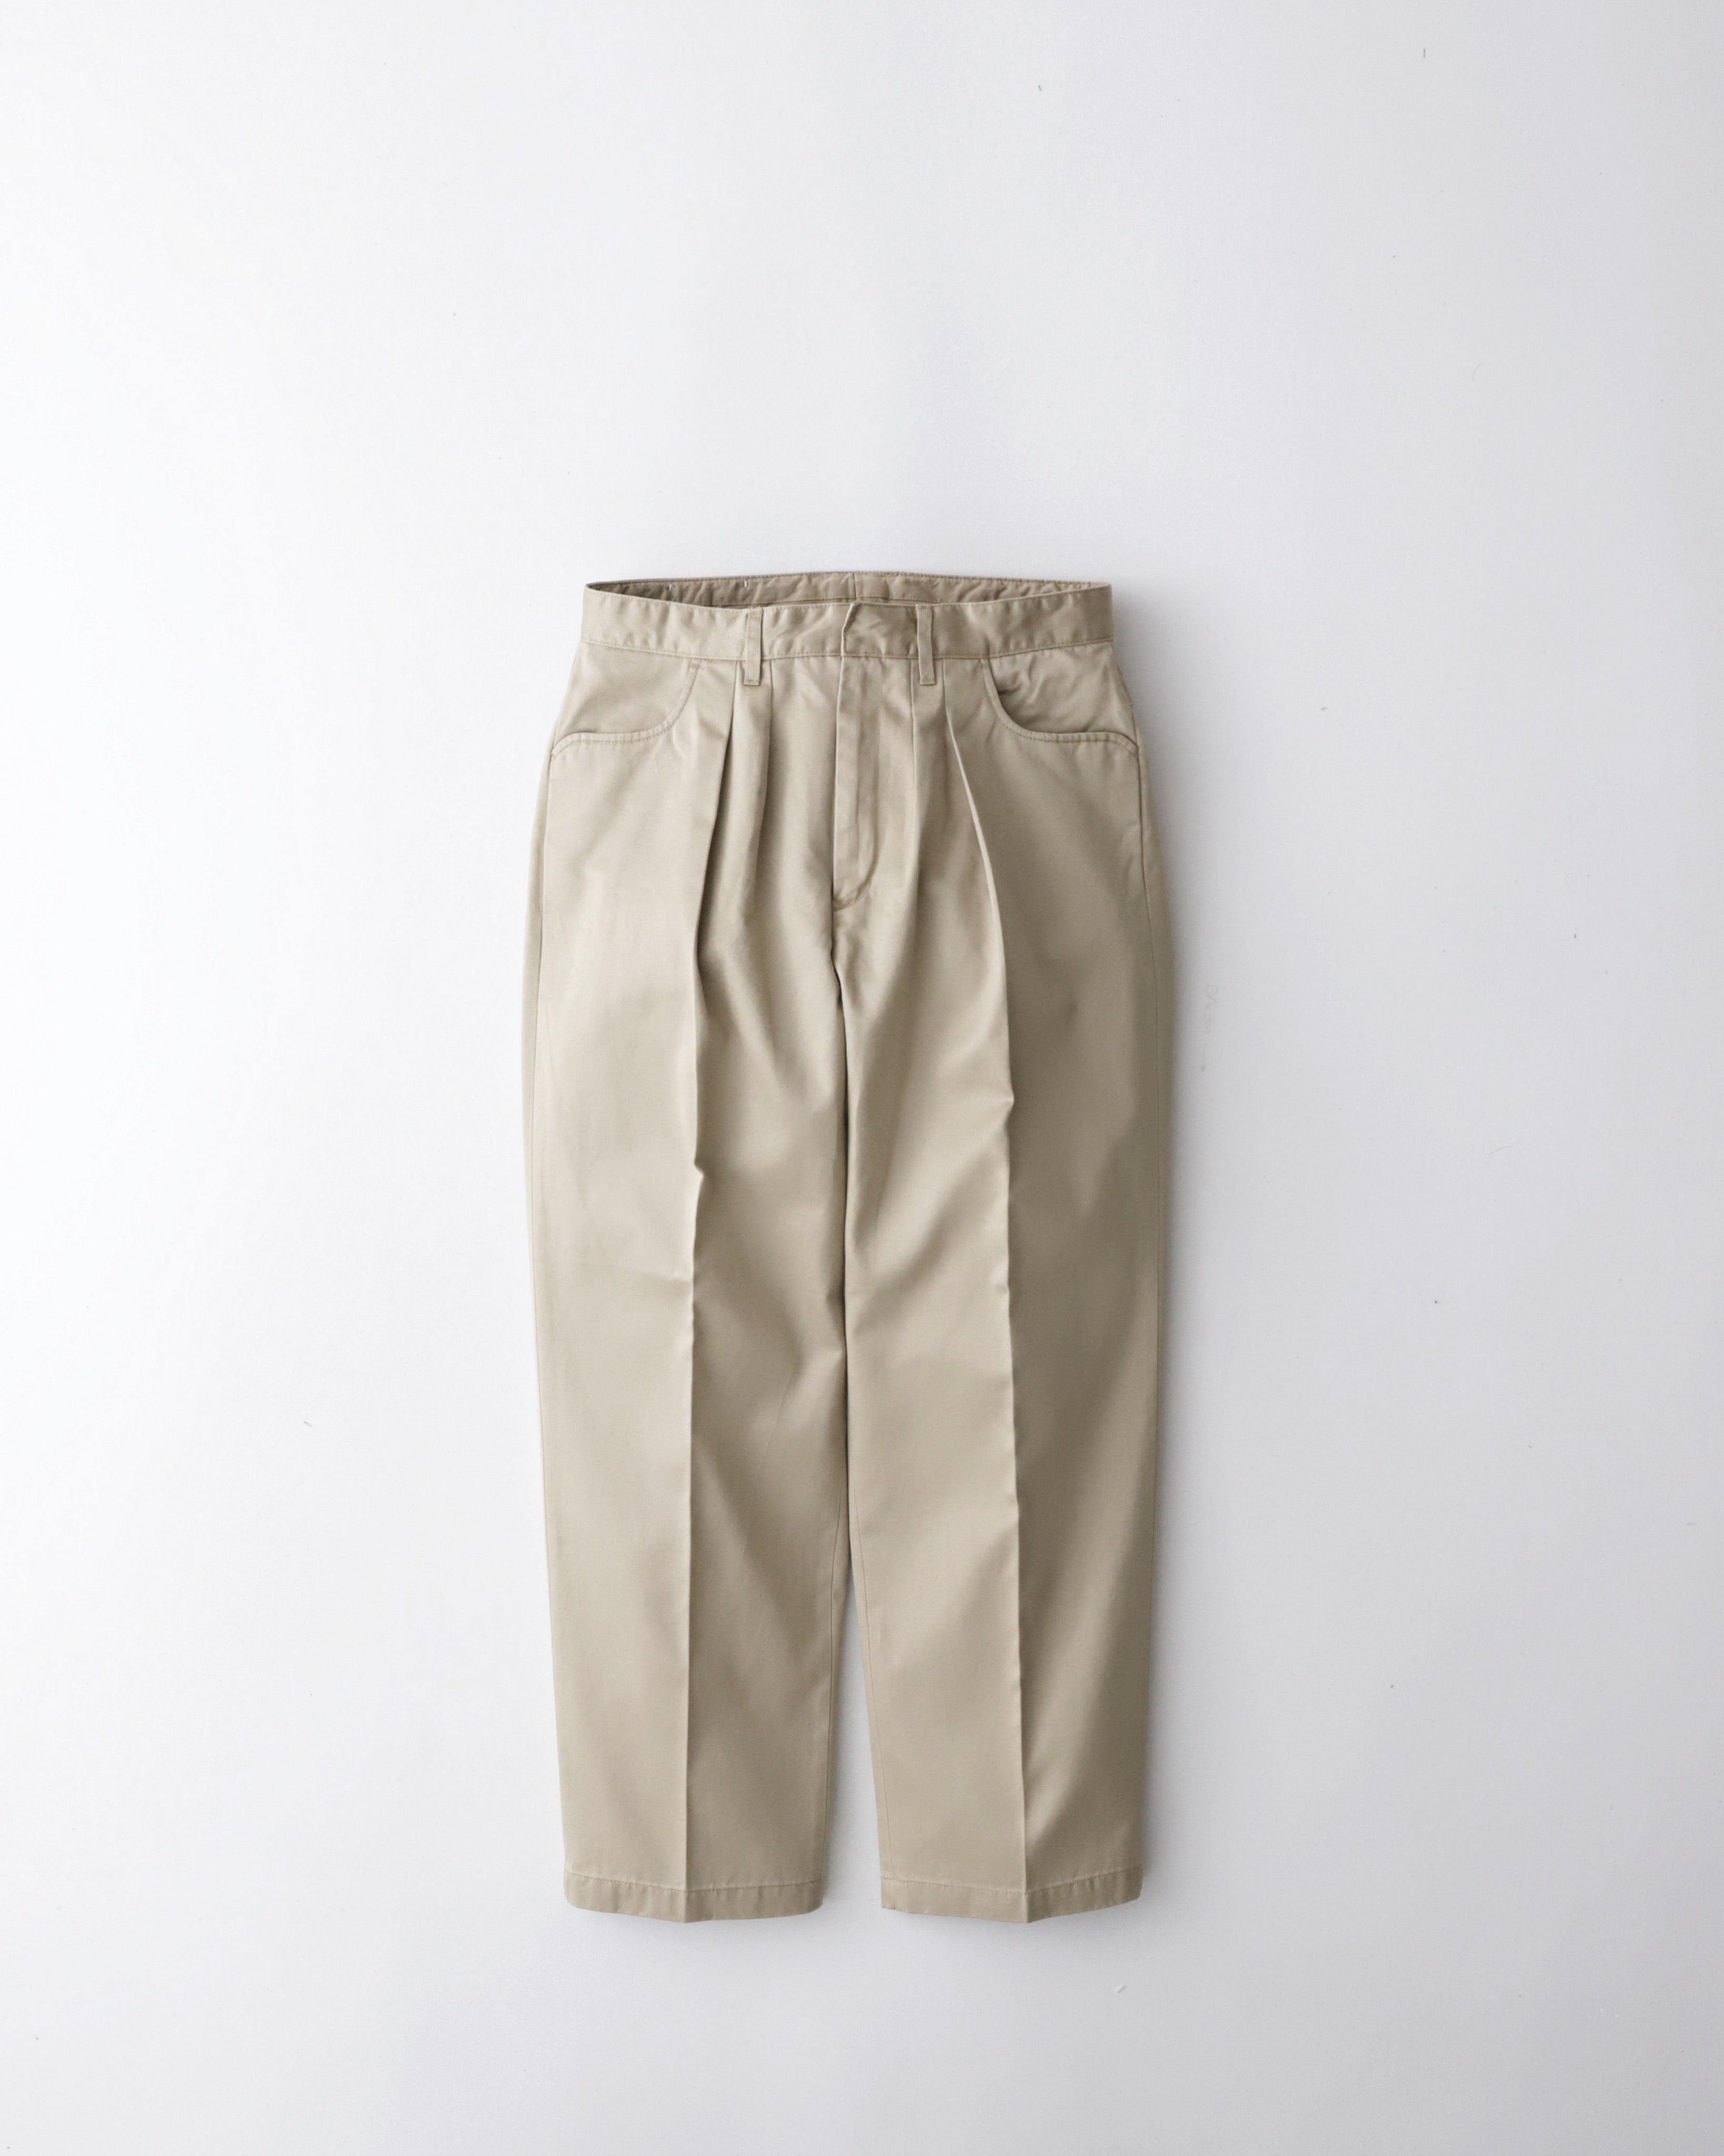 TWO-TUCK WIDE TAPERED PANTS / WESTPOINT